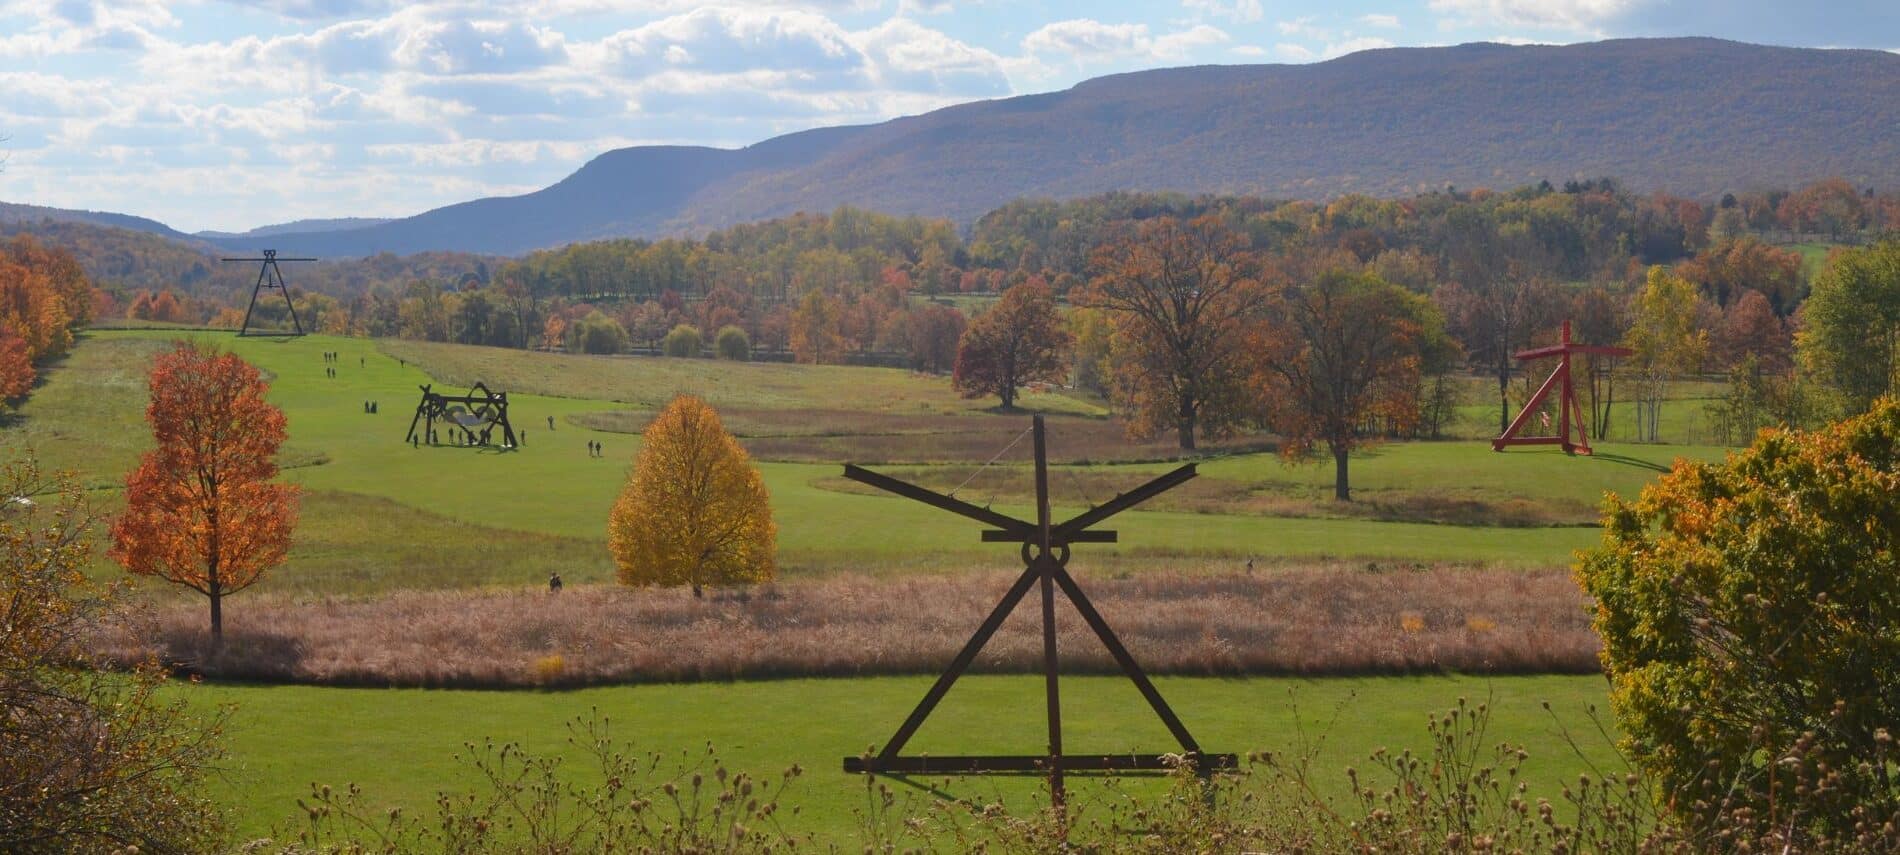 View of large sculptures among rolling hills and trees at Storm King Art Center.